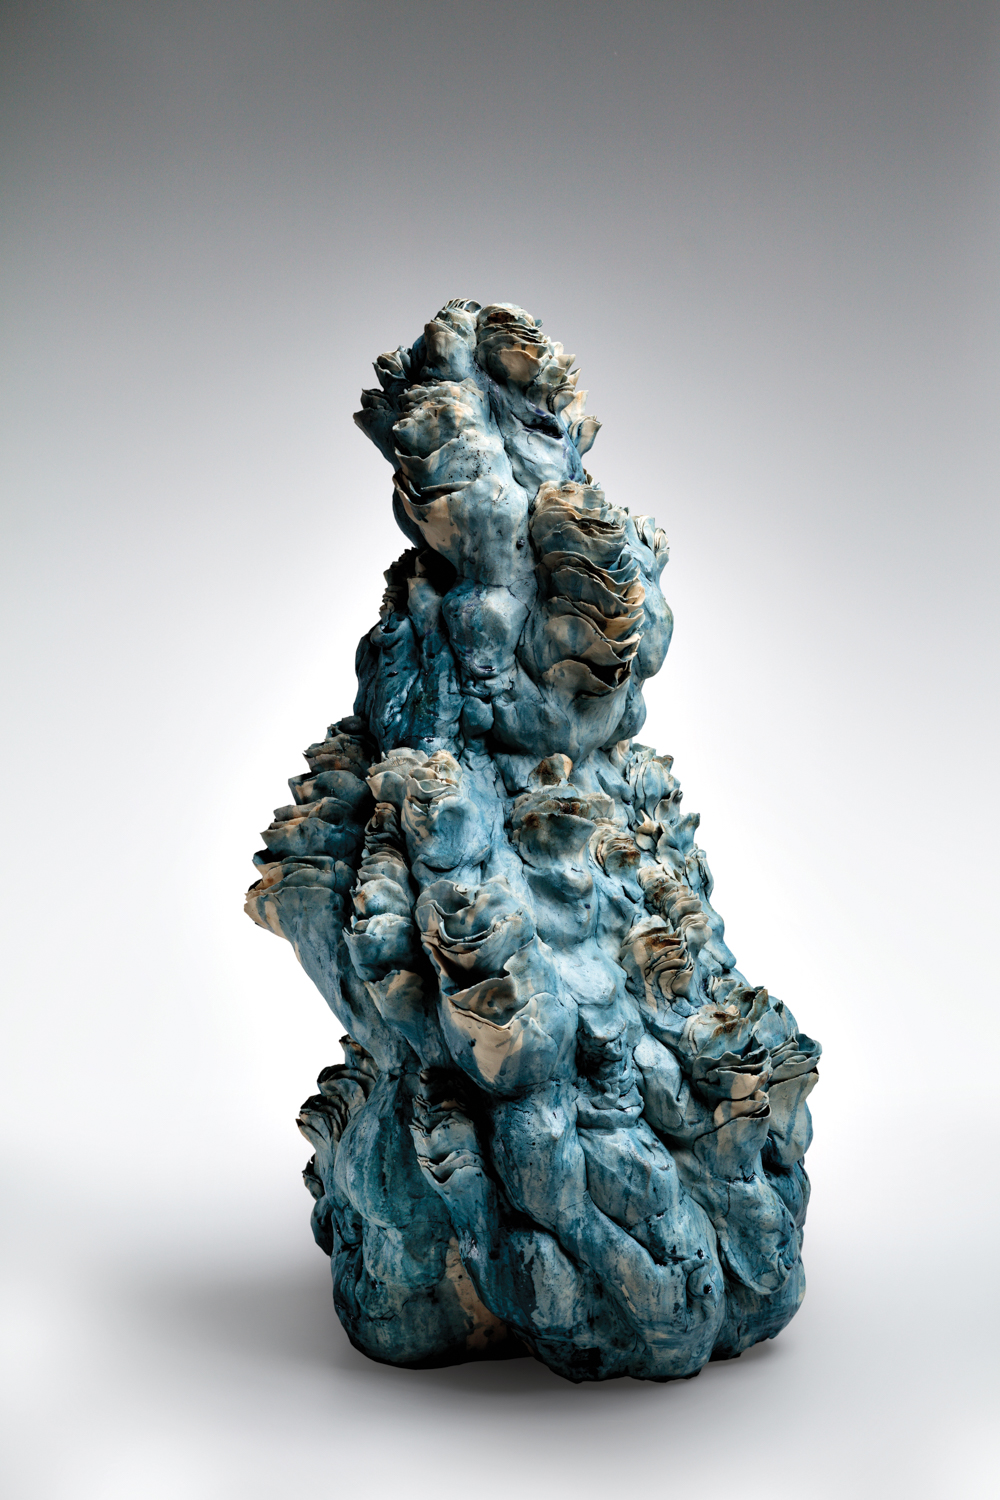 blue and grey ceramic sculpture by a Japanese artist